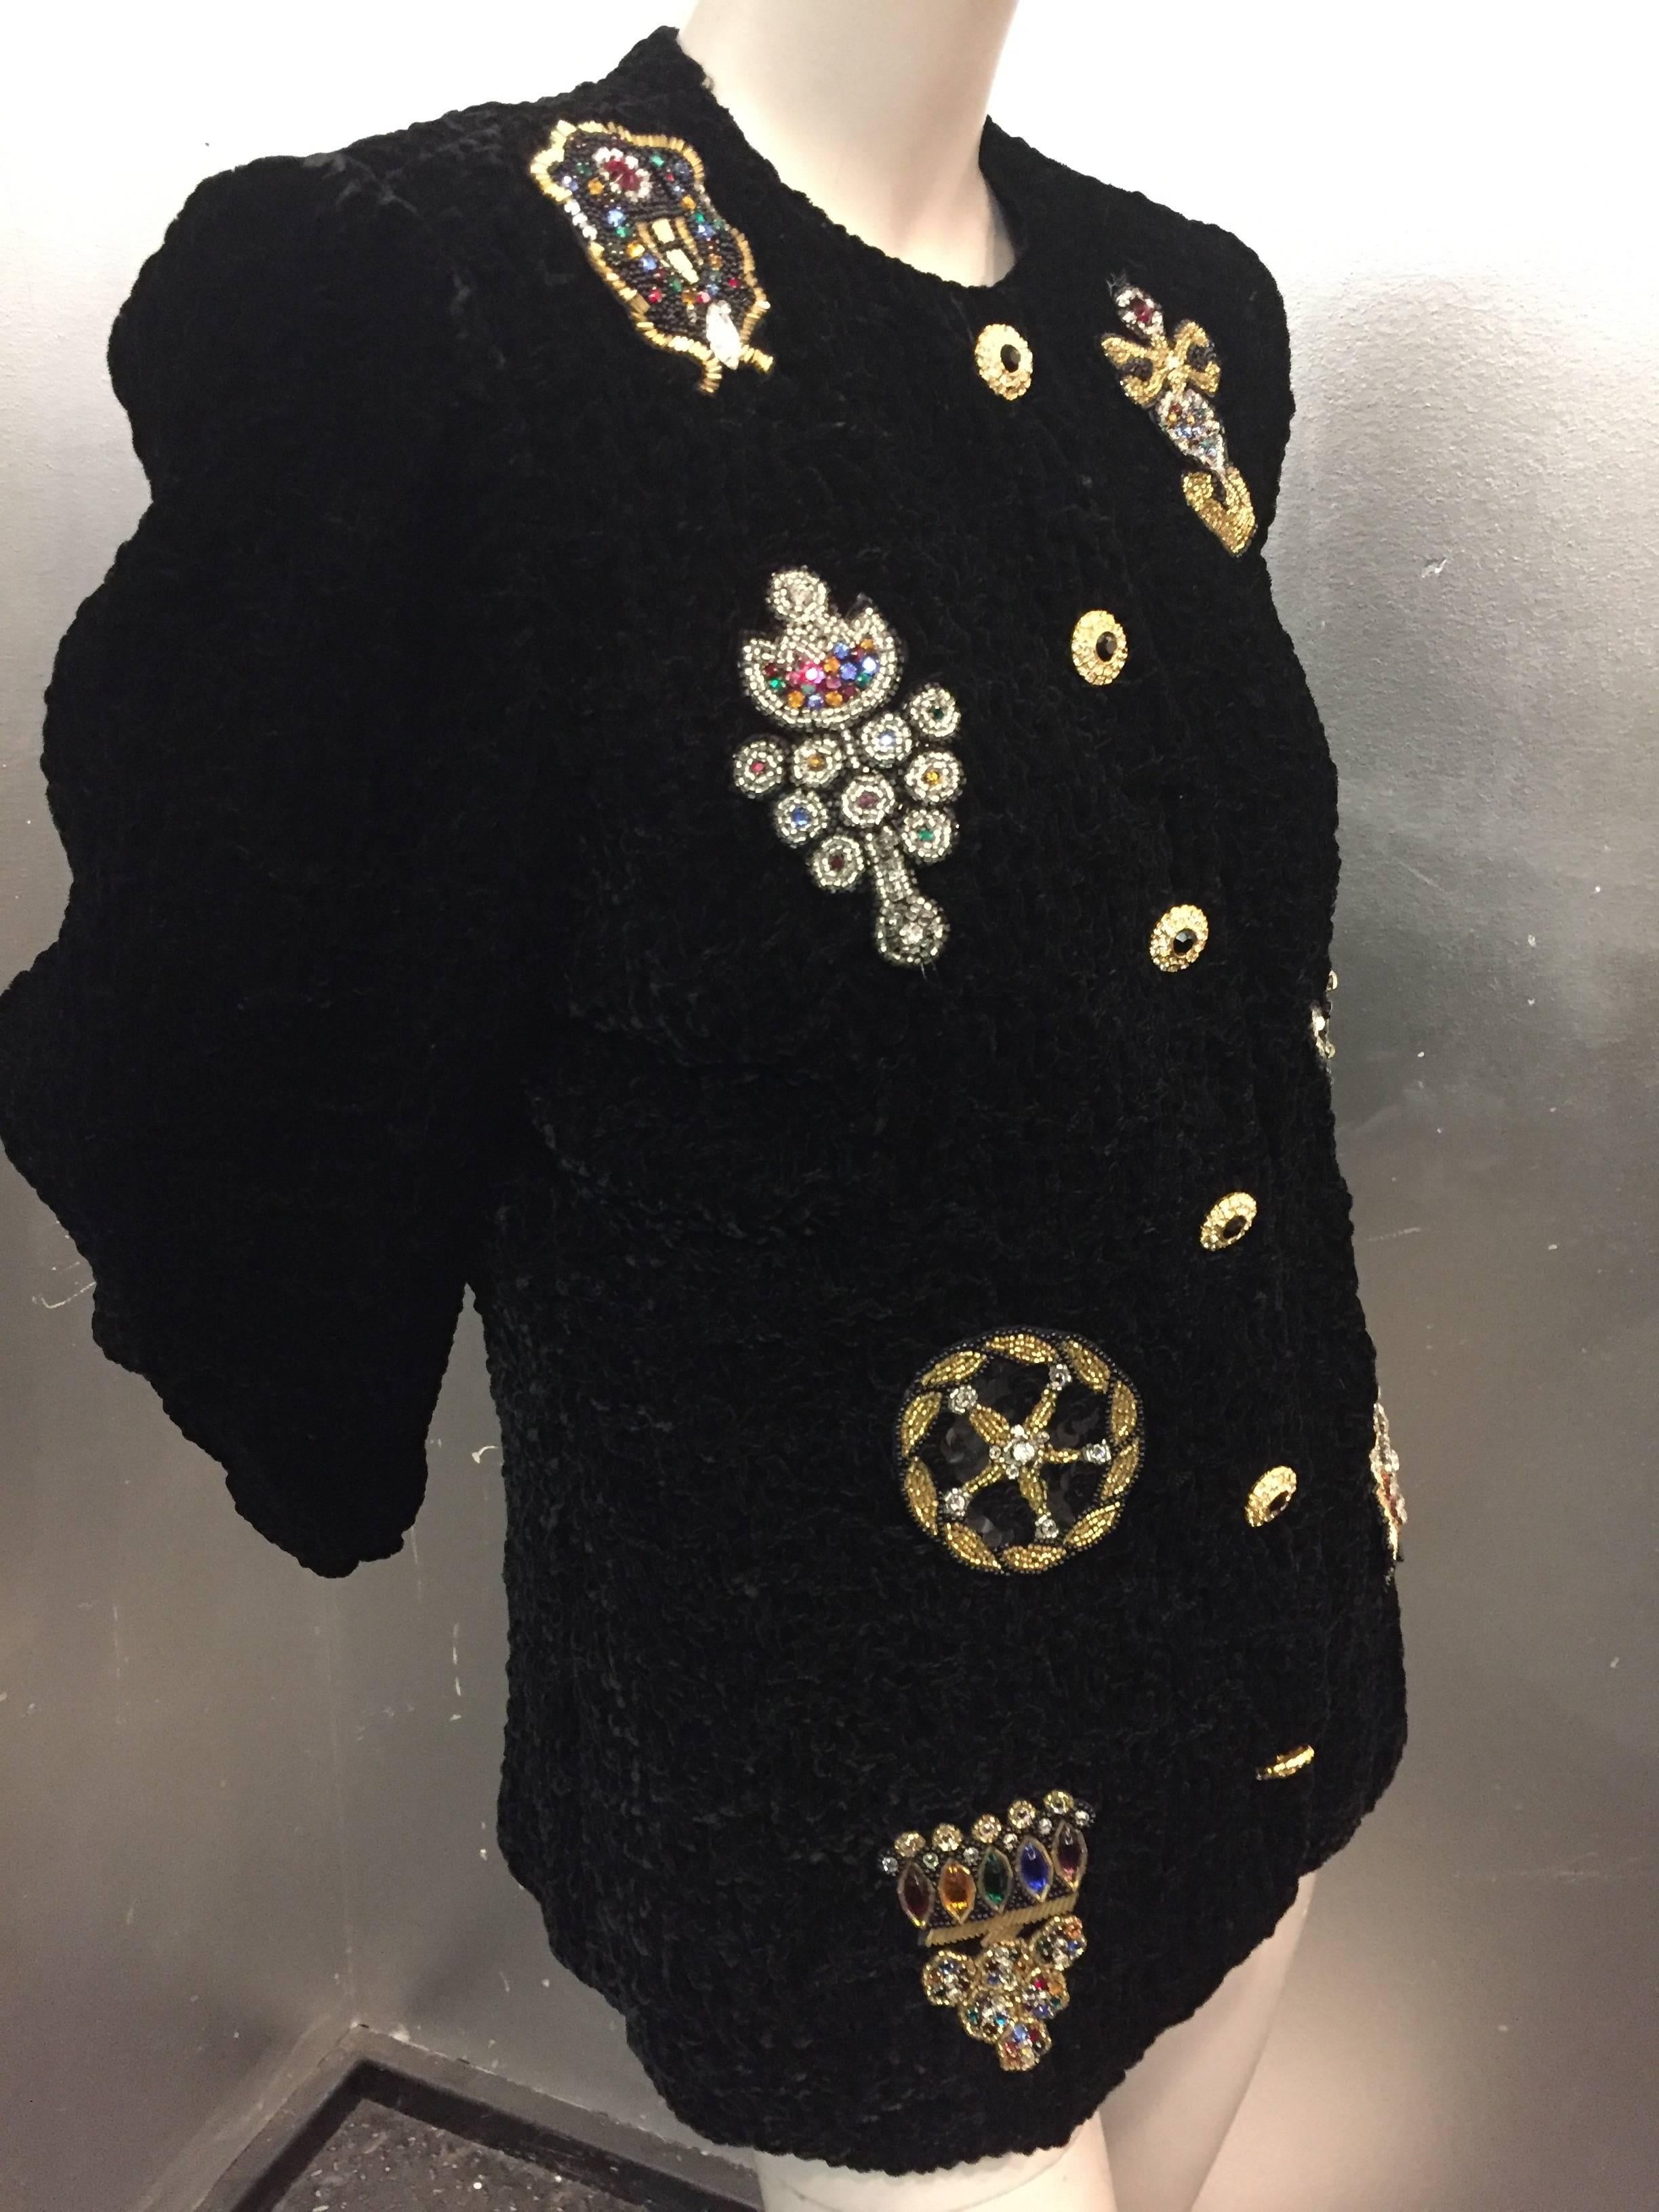 Women's 1980s Black Ruched Velvet Evening Jacket w Sequin and Bead Appliqué Medallions For Sale